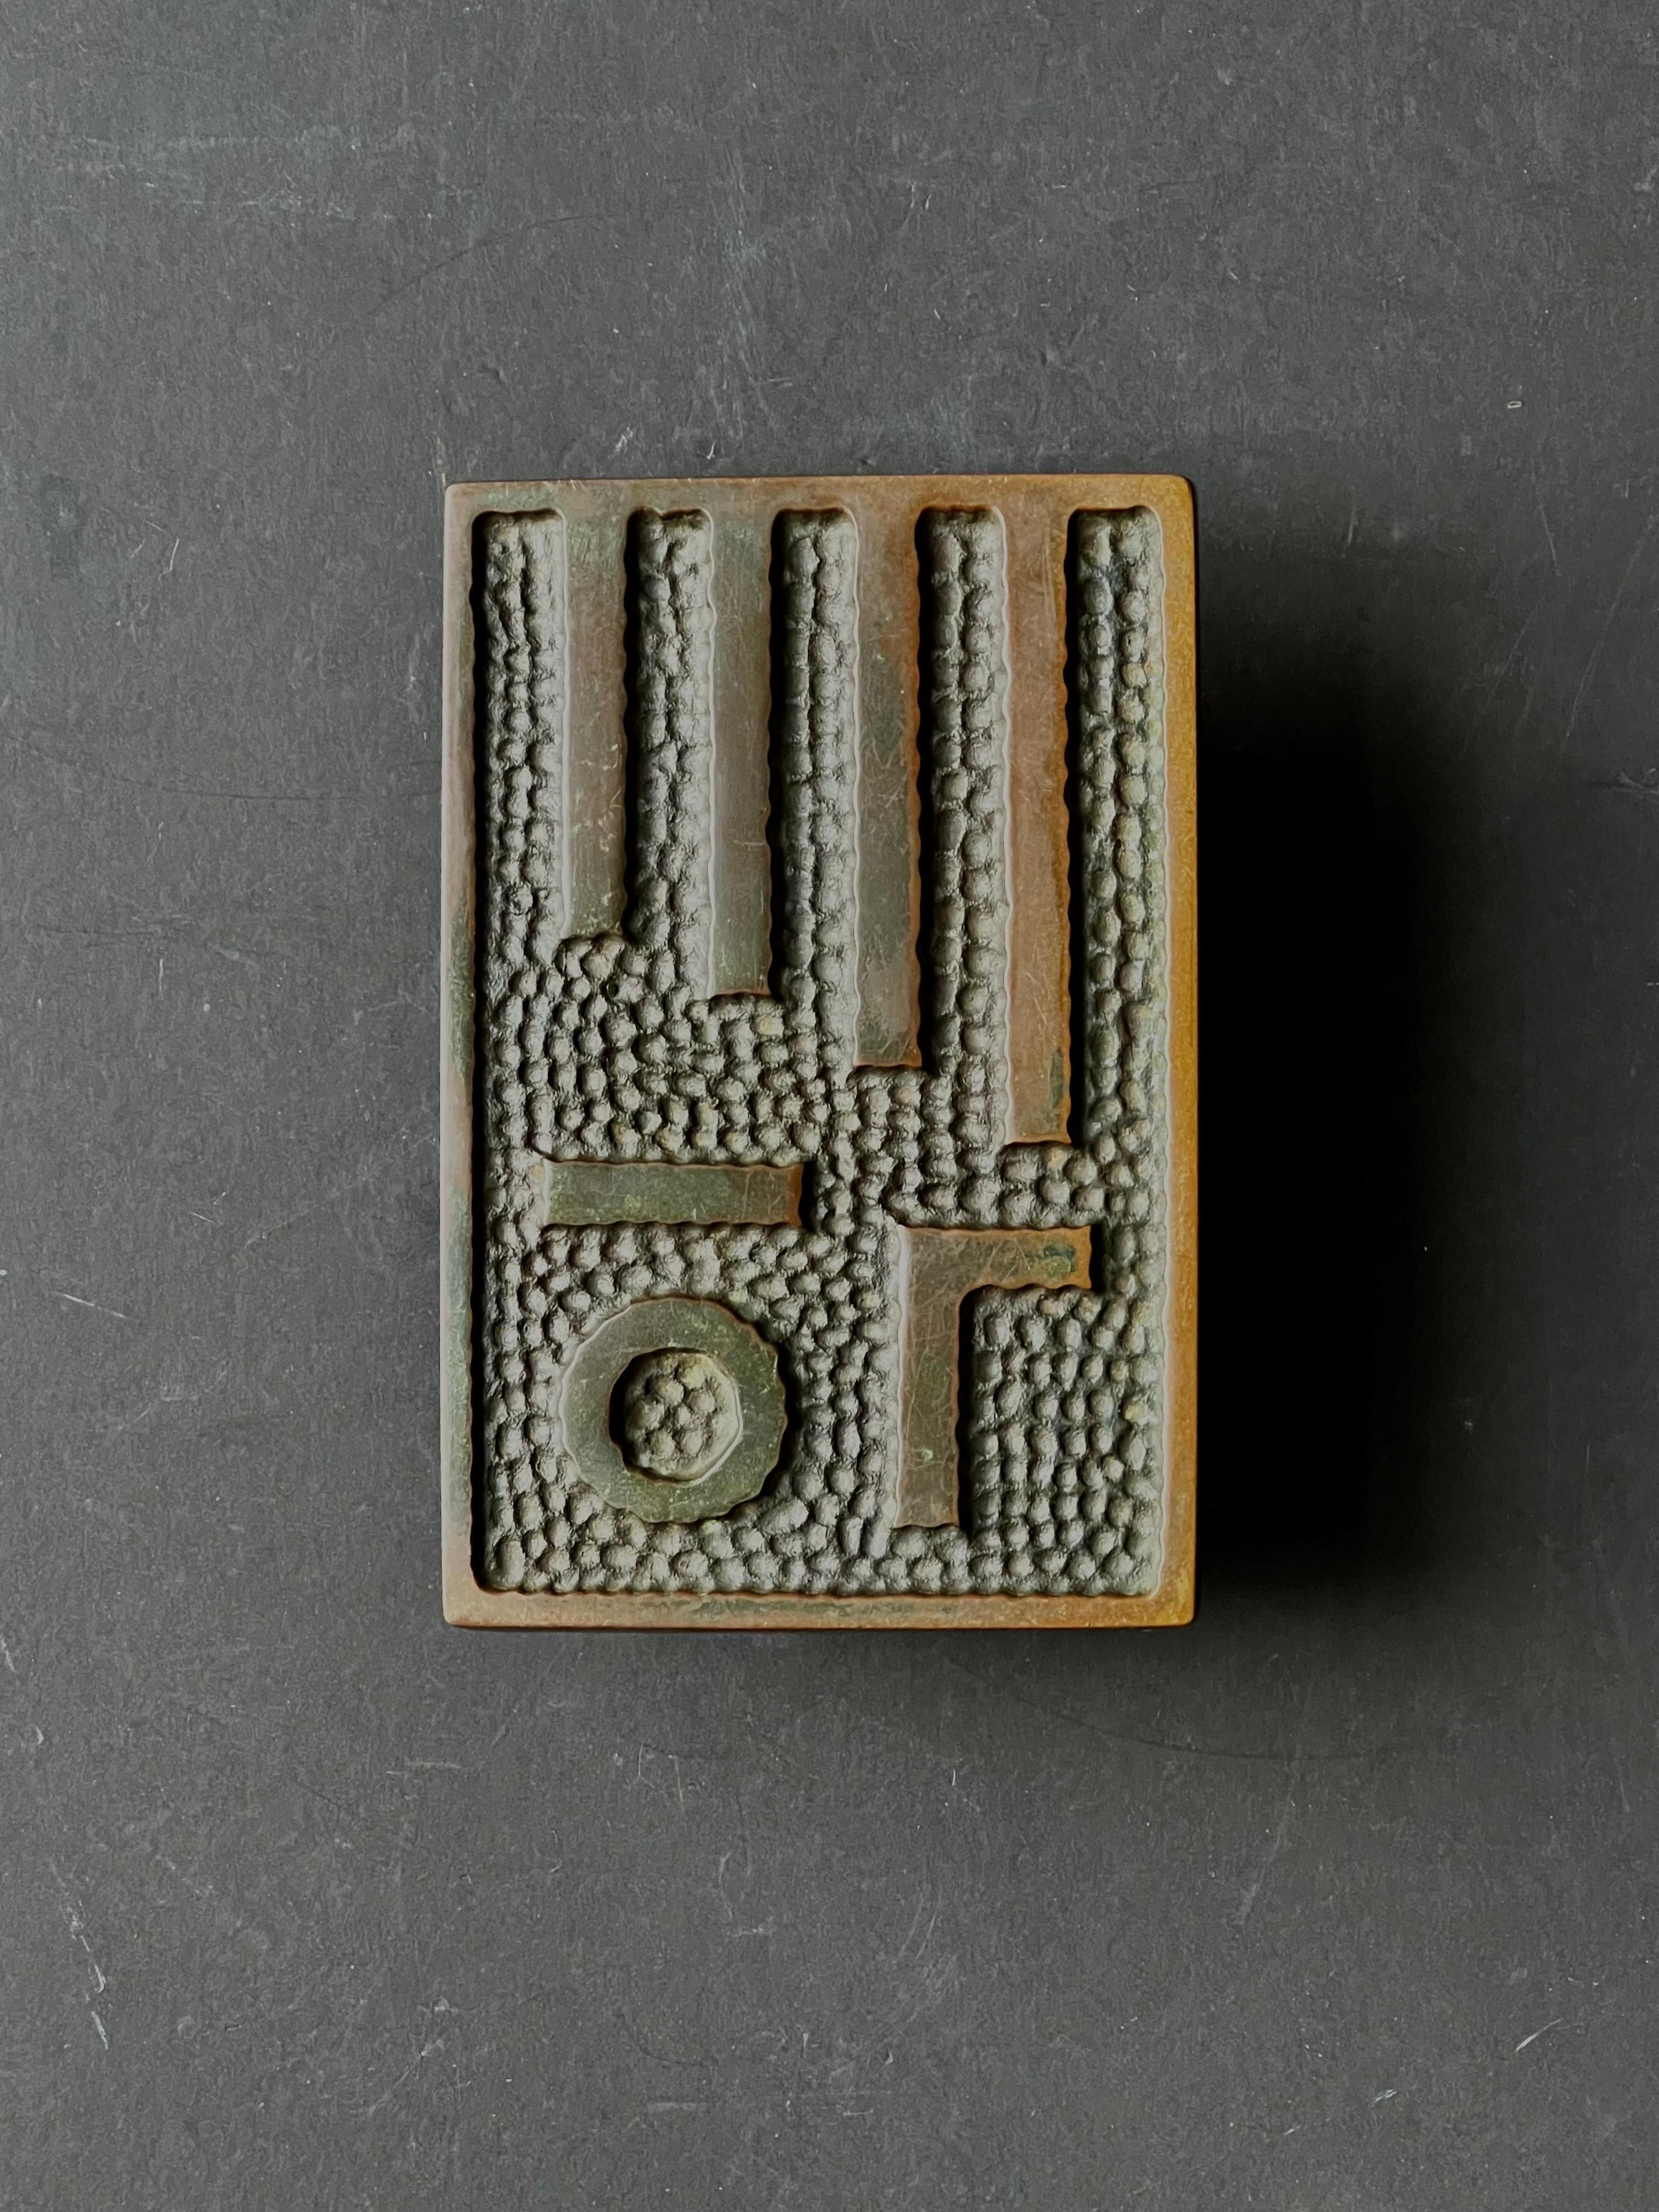 A large push-pull door handle of cast bronze with geometric modernist design. Found in Germany and dating from the third quarter 20th century.

The handle has been left as found, unpolished, and shows different tones from deep brown to rich